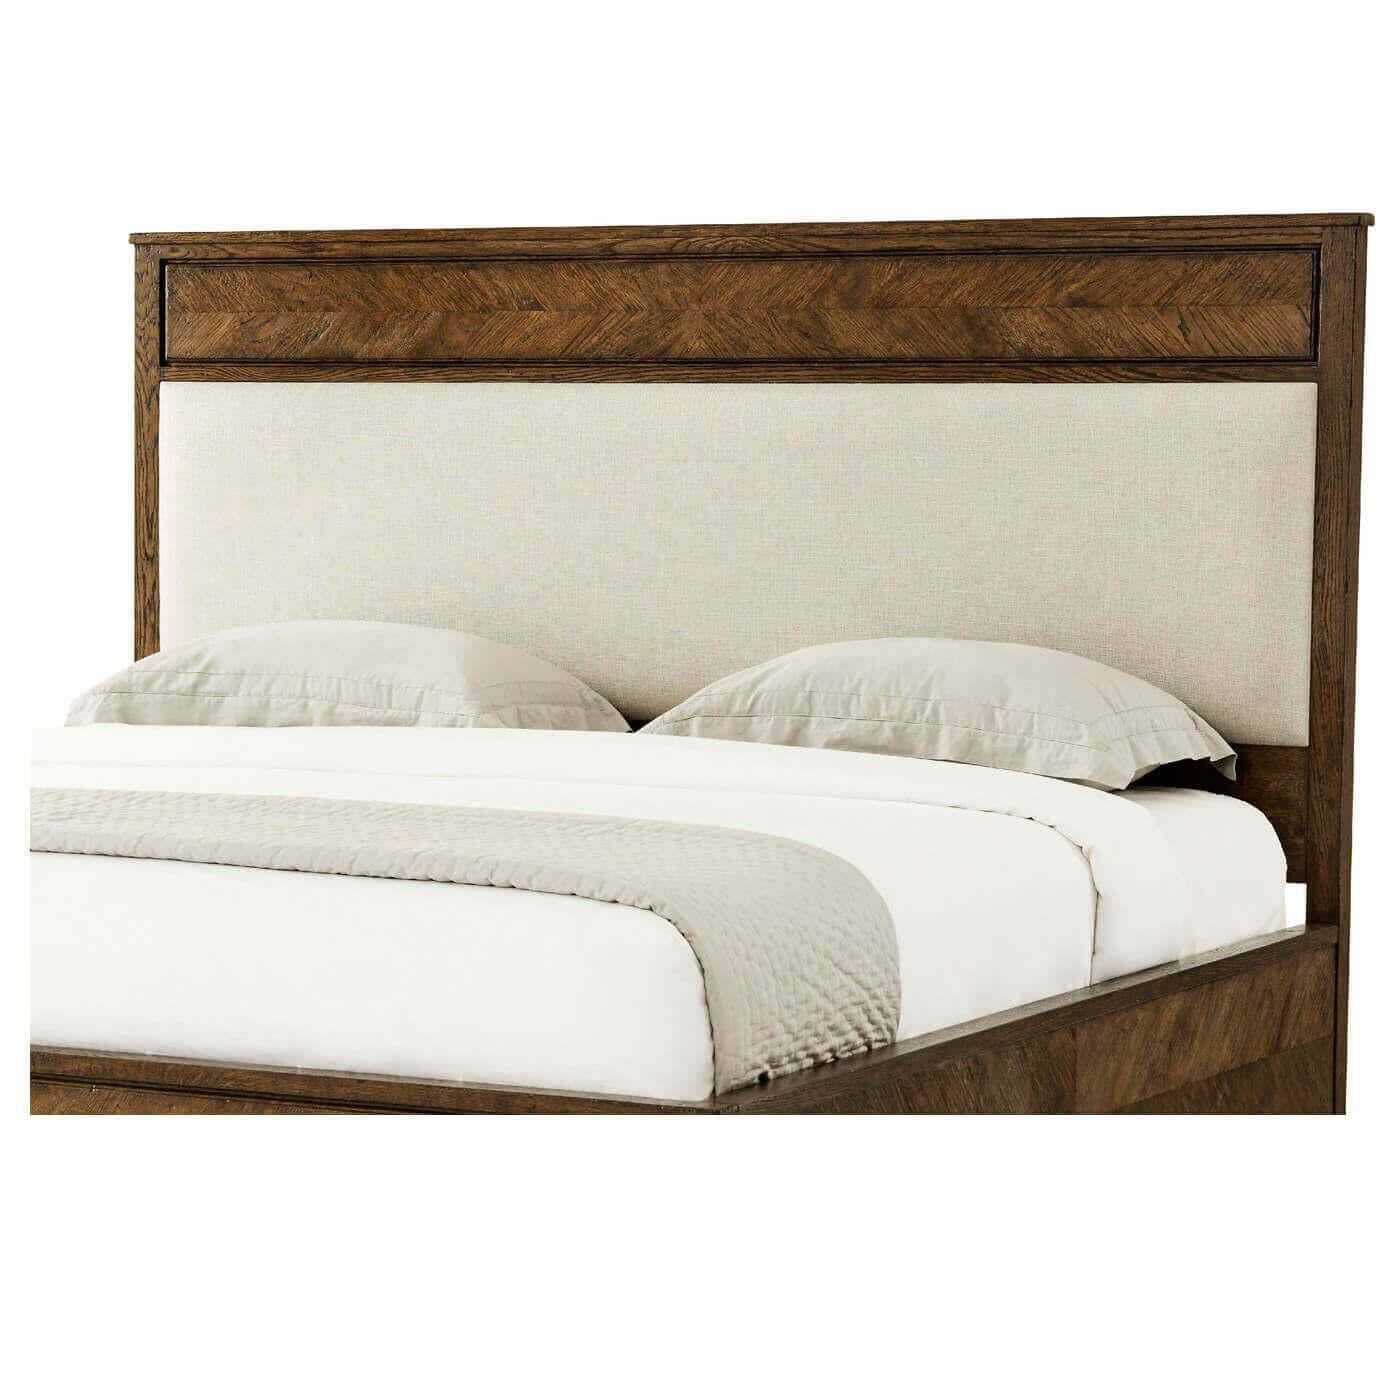 A parquetry California king bed crafted from rustic oak. It has a classic silhouette with an upholstered panel headboard with a framed oak side rail and tapered finish leg. 

Dimensions: 77.5